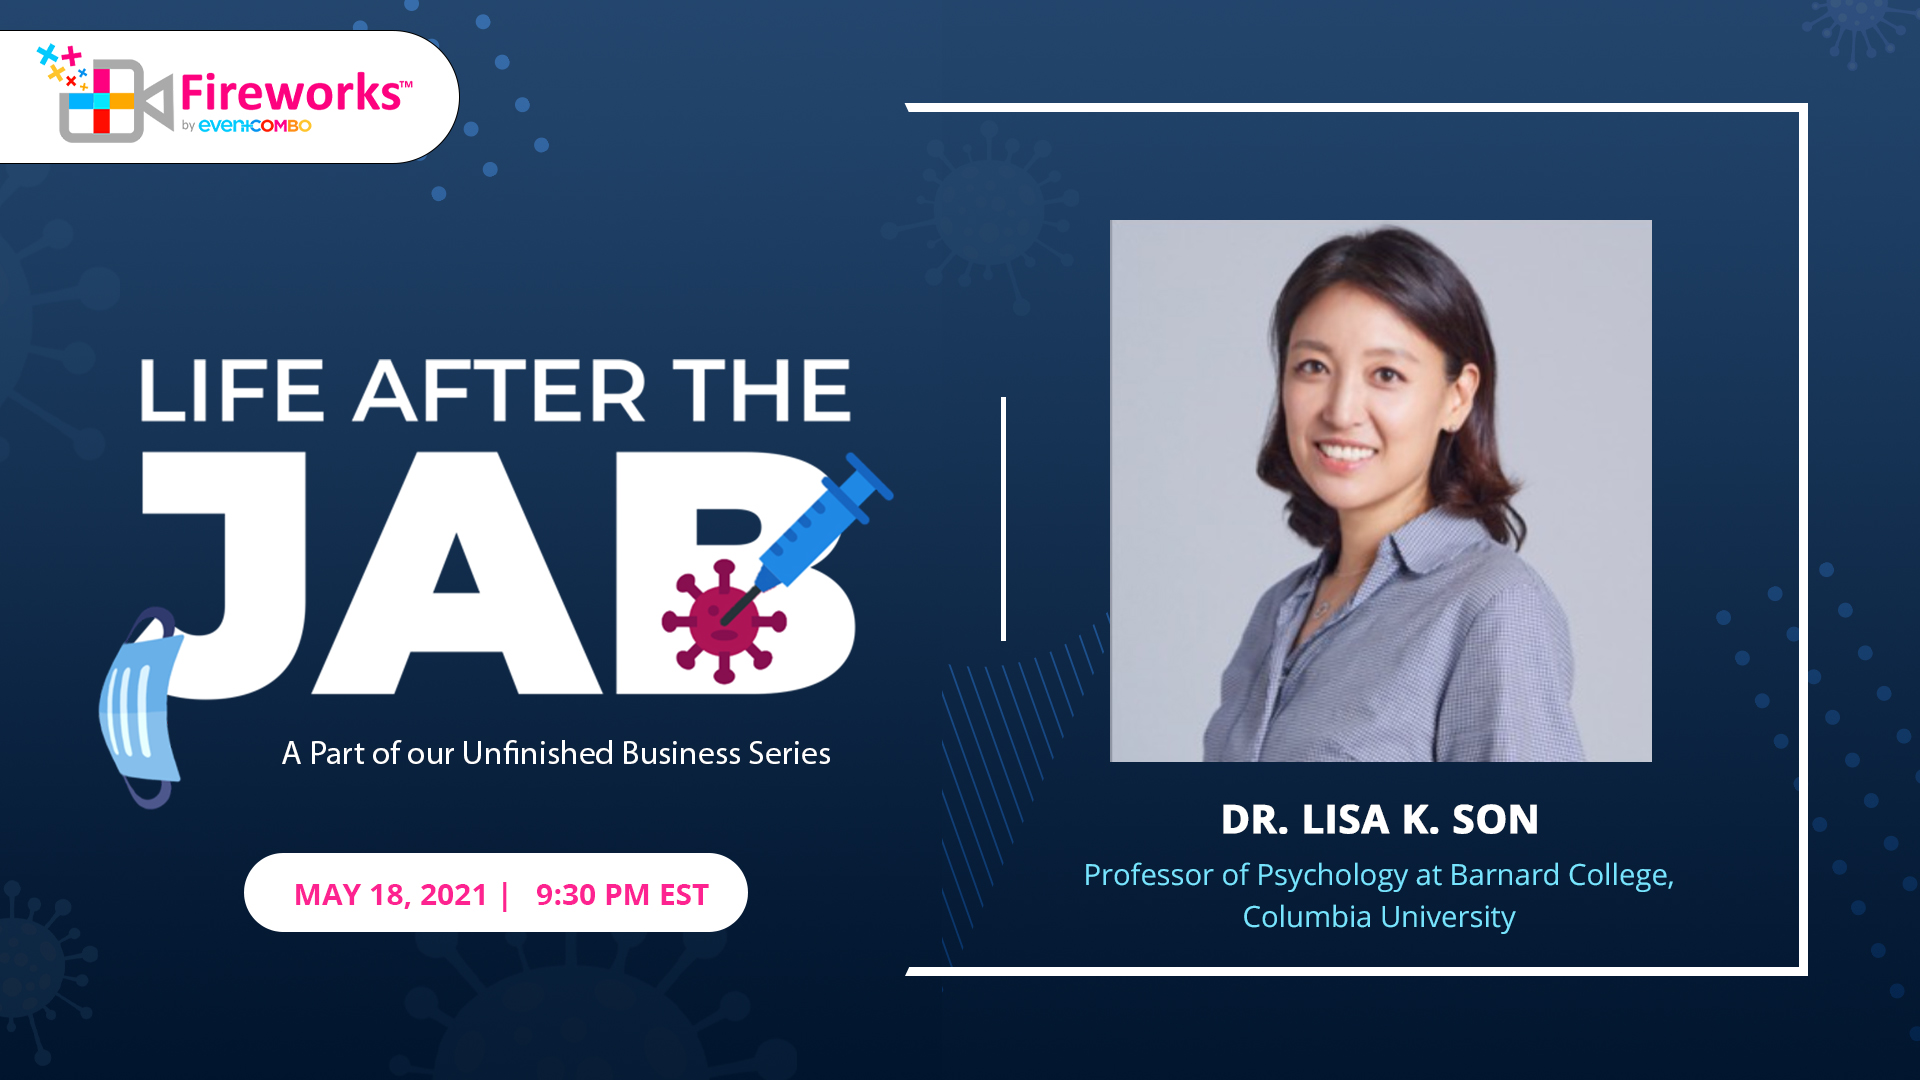 Life After The Jab with Dr. Lisa K. Son - Exploring Cultural, Societal, and Economic Issues Post-Vaccine 